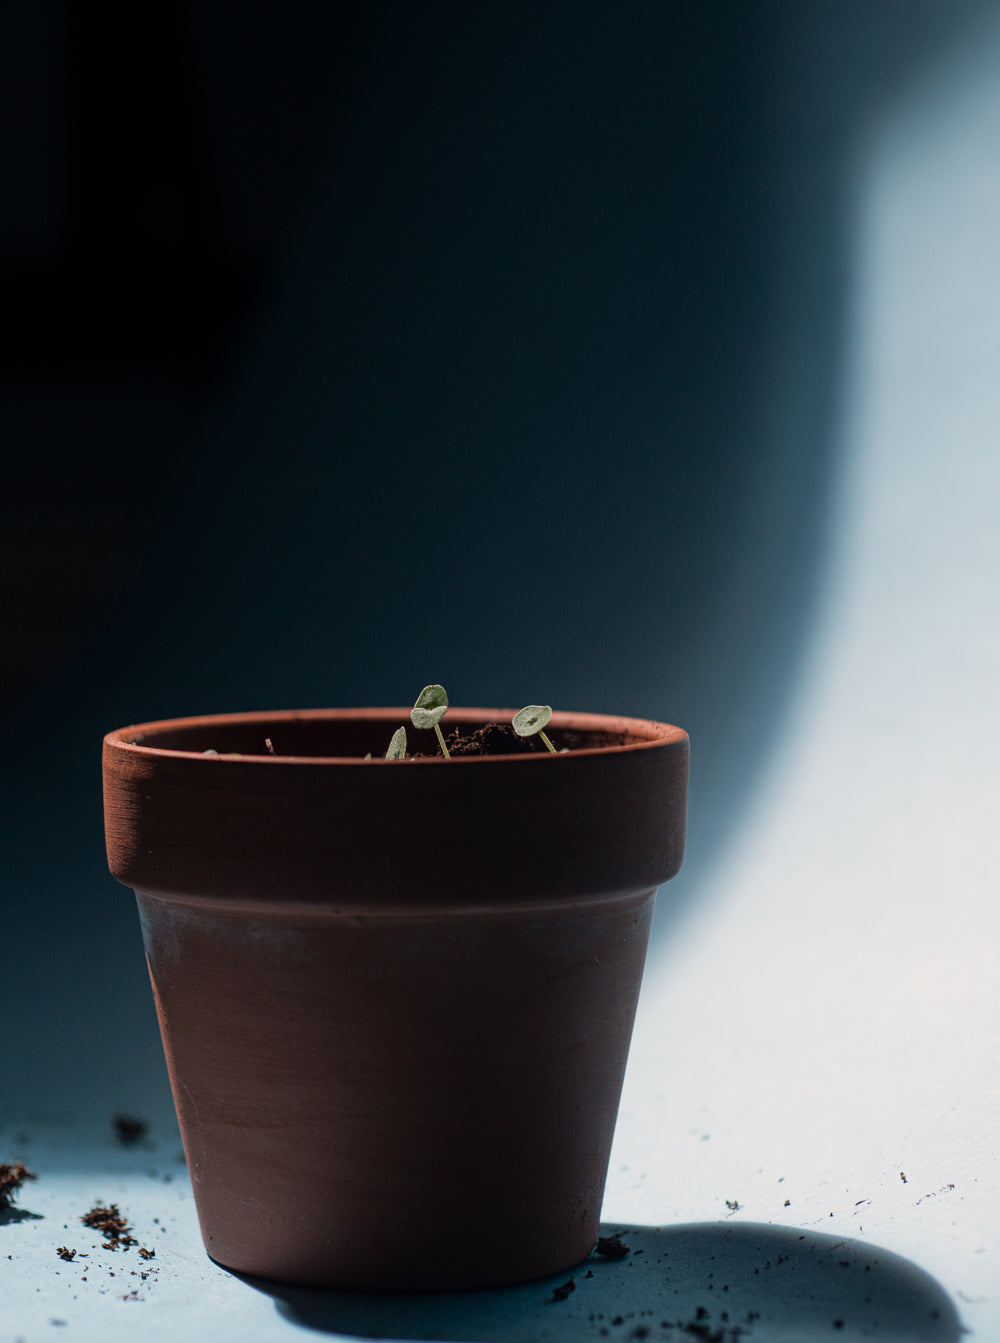 small plant sprouts in a terracotta pot